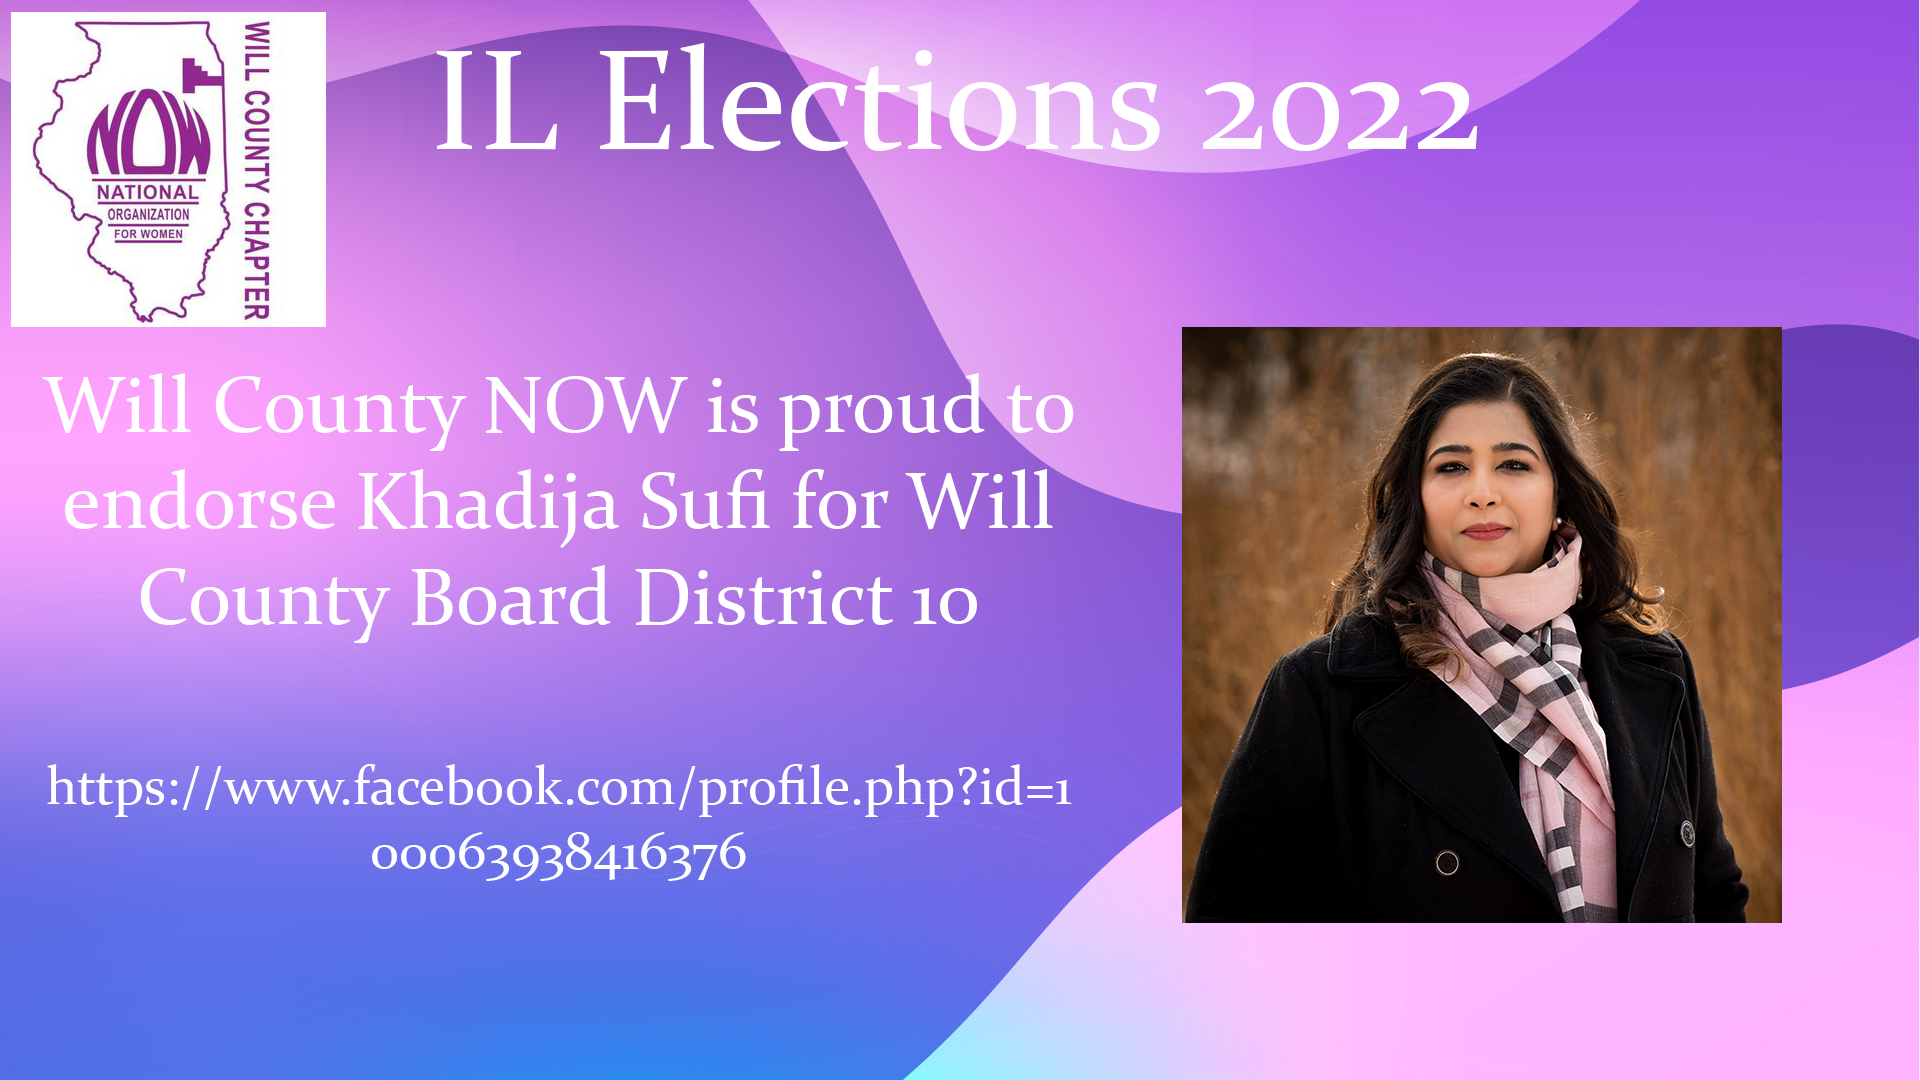 Will County NOW Endorses Khadija Sufi for Will County Board District 10